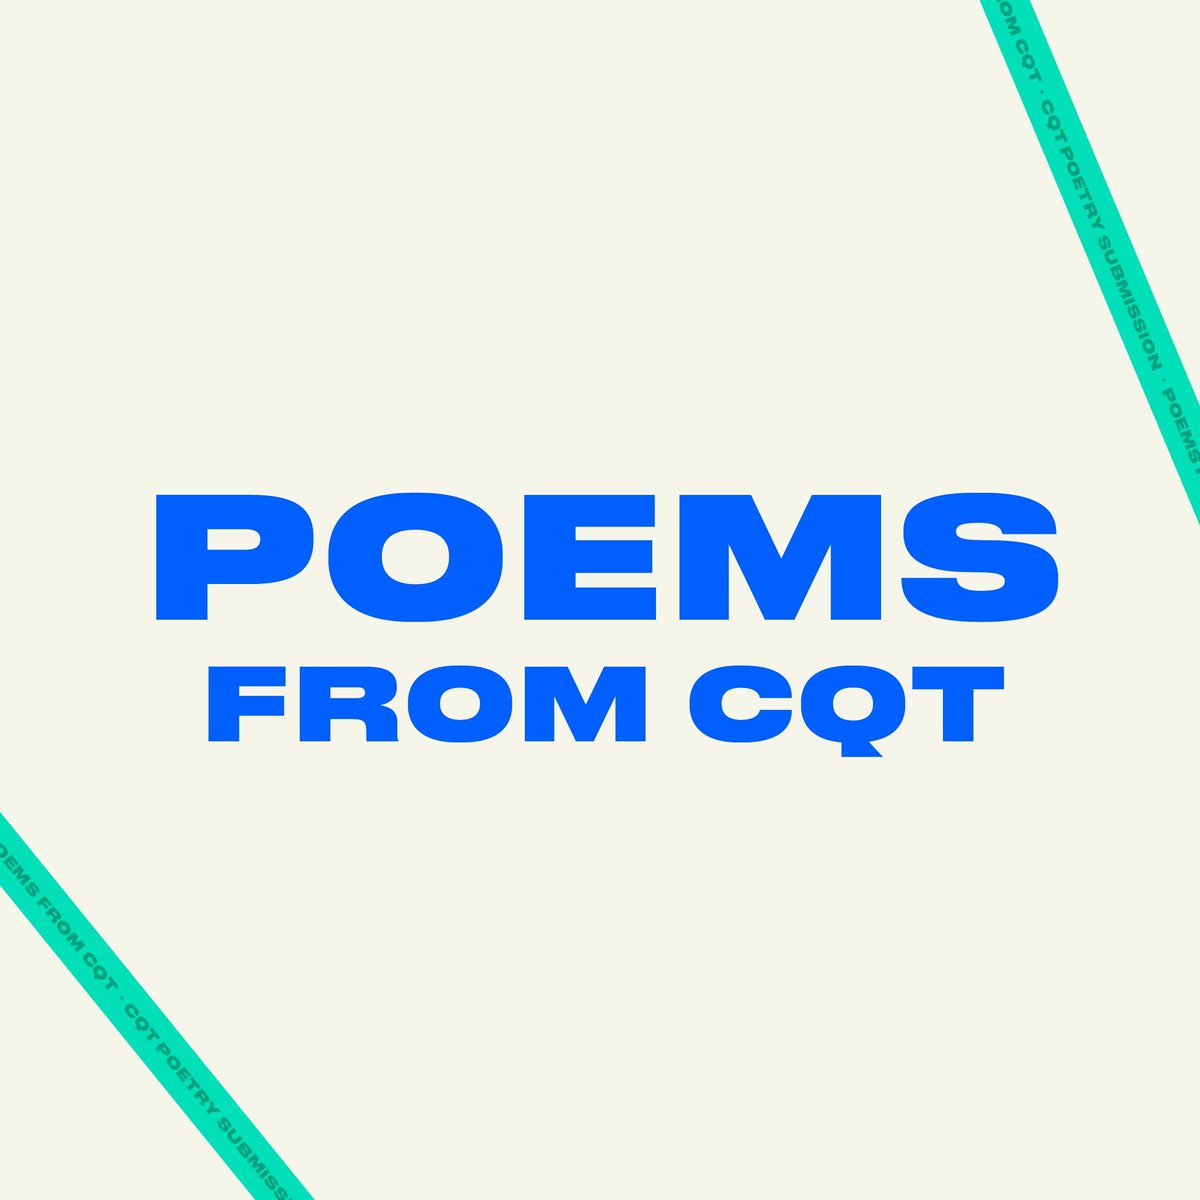 We launched a poetry open call for CQTians last year and CQTians showcased their literary flair ✍️ Read about it here: bit.ly/3JVF89q The full set of poems: bit.ly/3JPyCkN